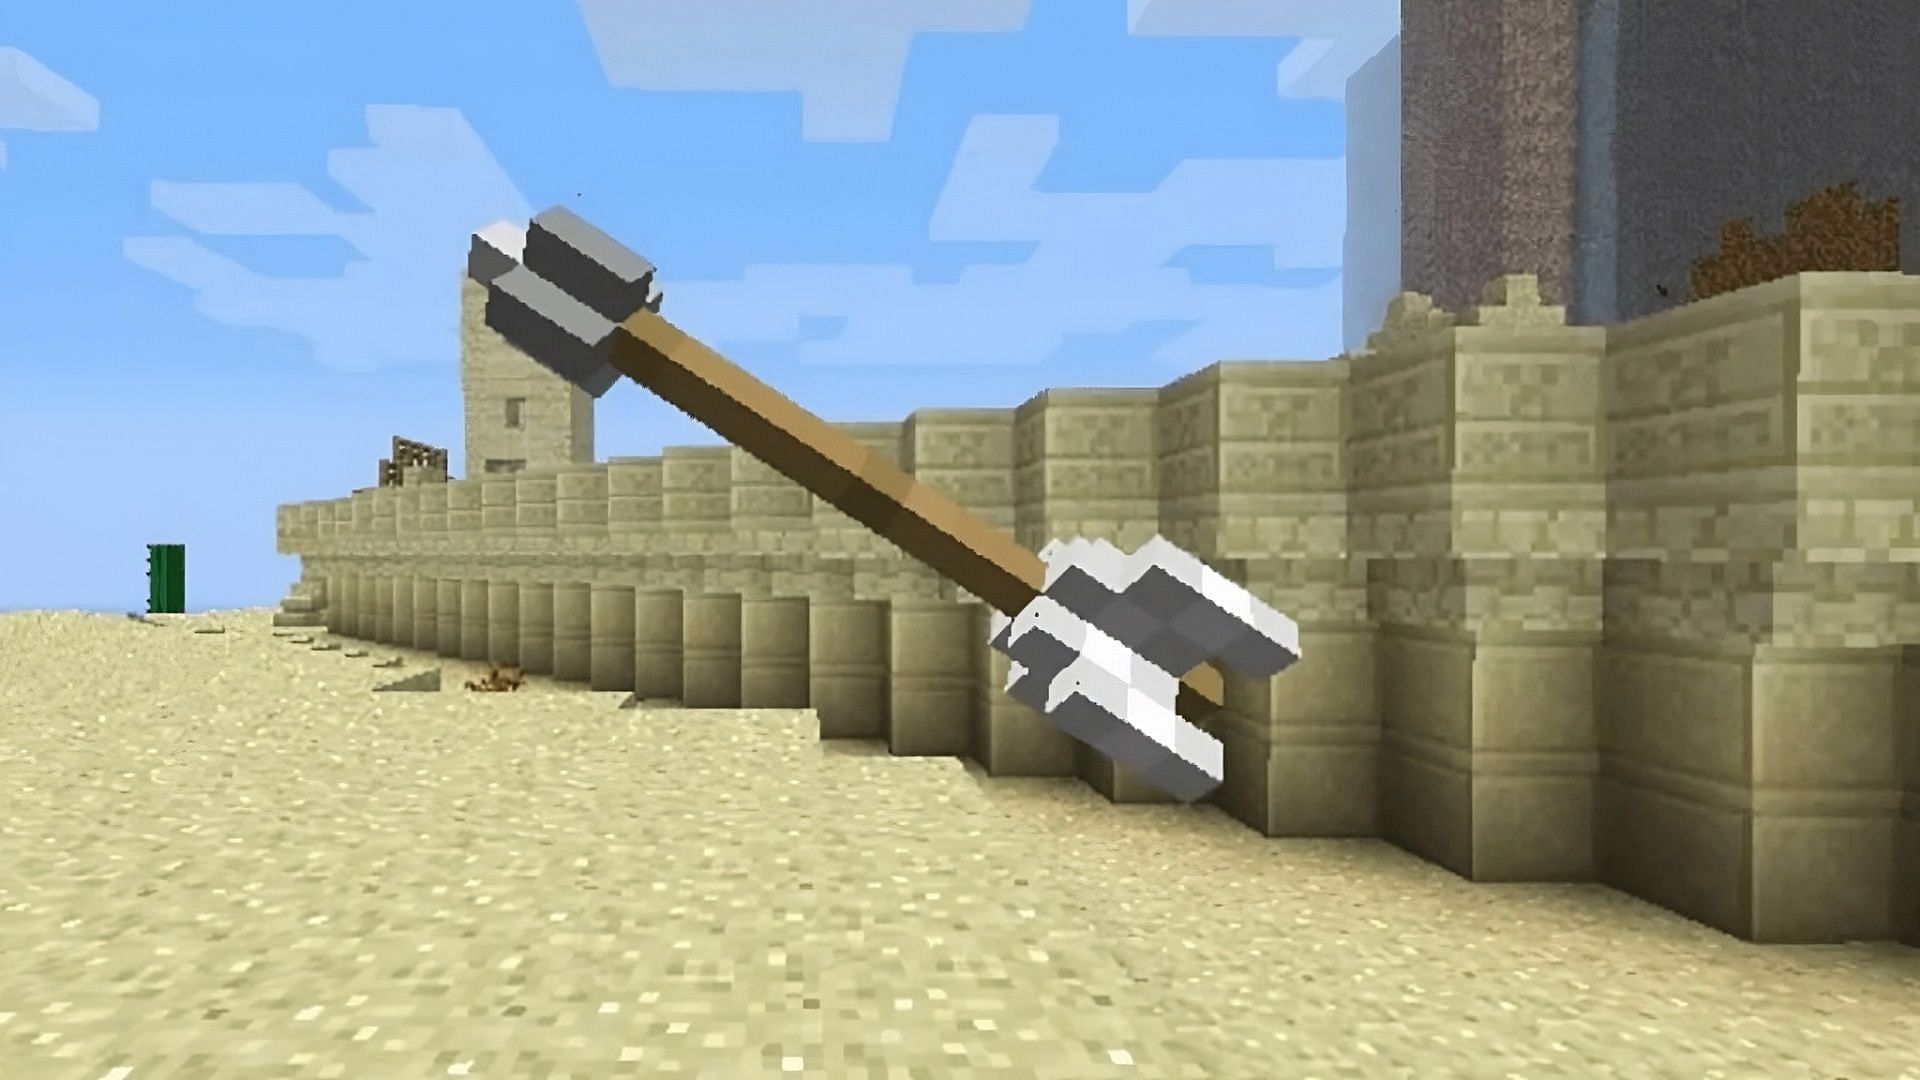 Minecraft players will need plenty of arrows if they